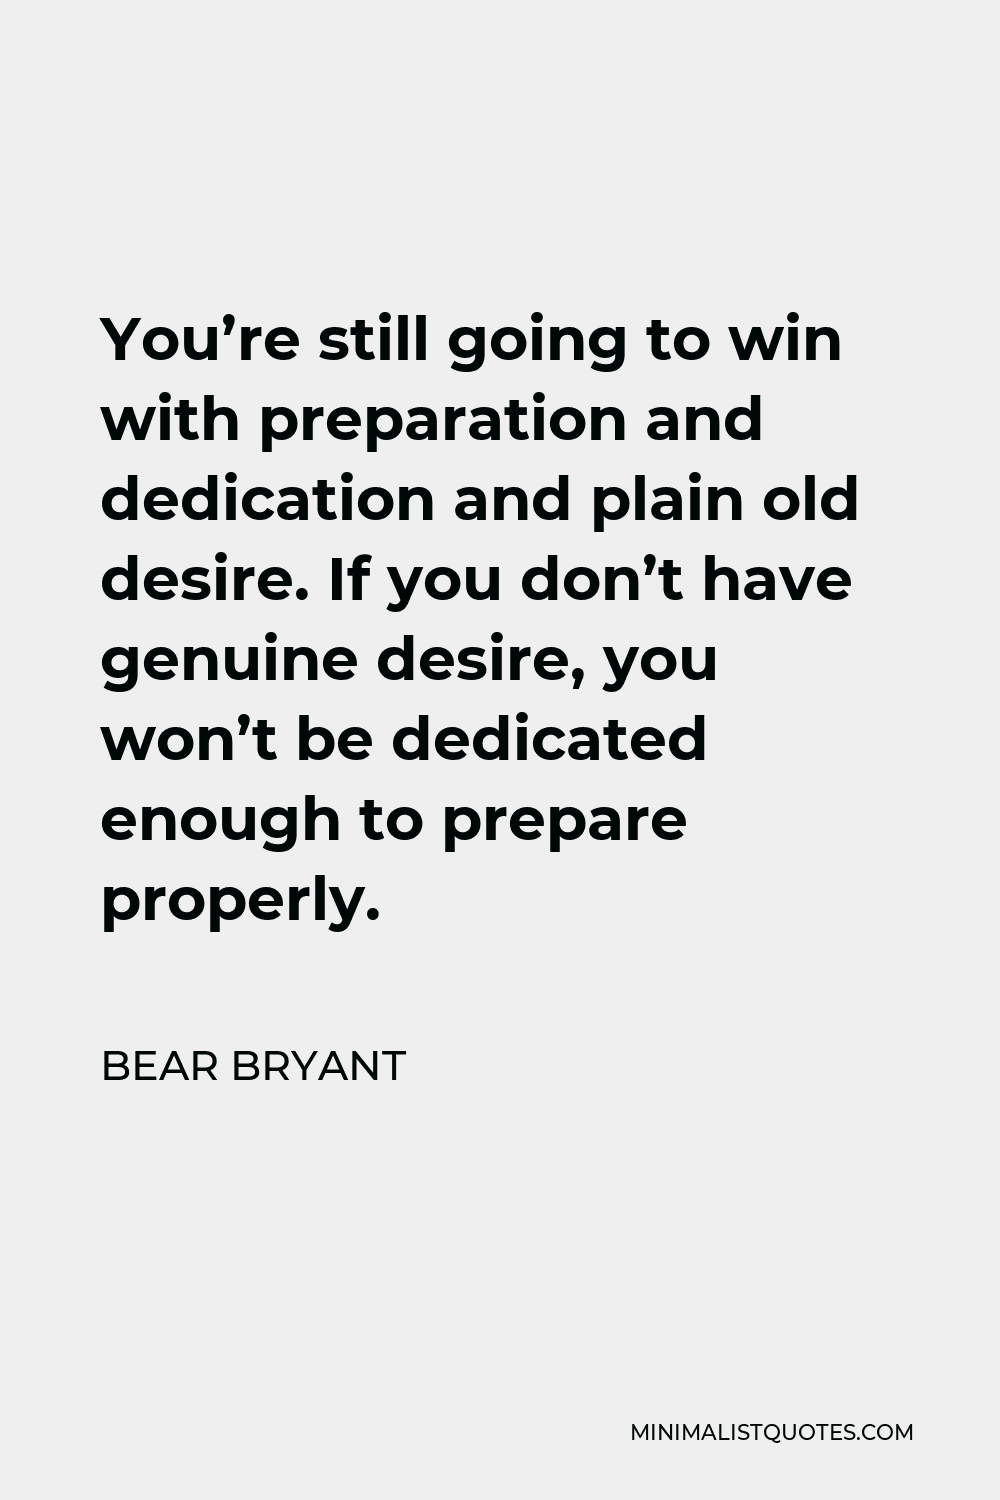 Bear Bryant Quote - You’re still going to win with preparation and dedication and plain old desire. If you don’t have genuine desire, you won’t be dedicated enough to prepare properly.